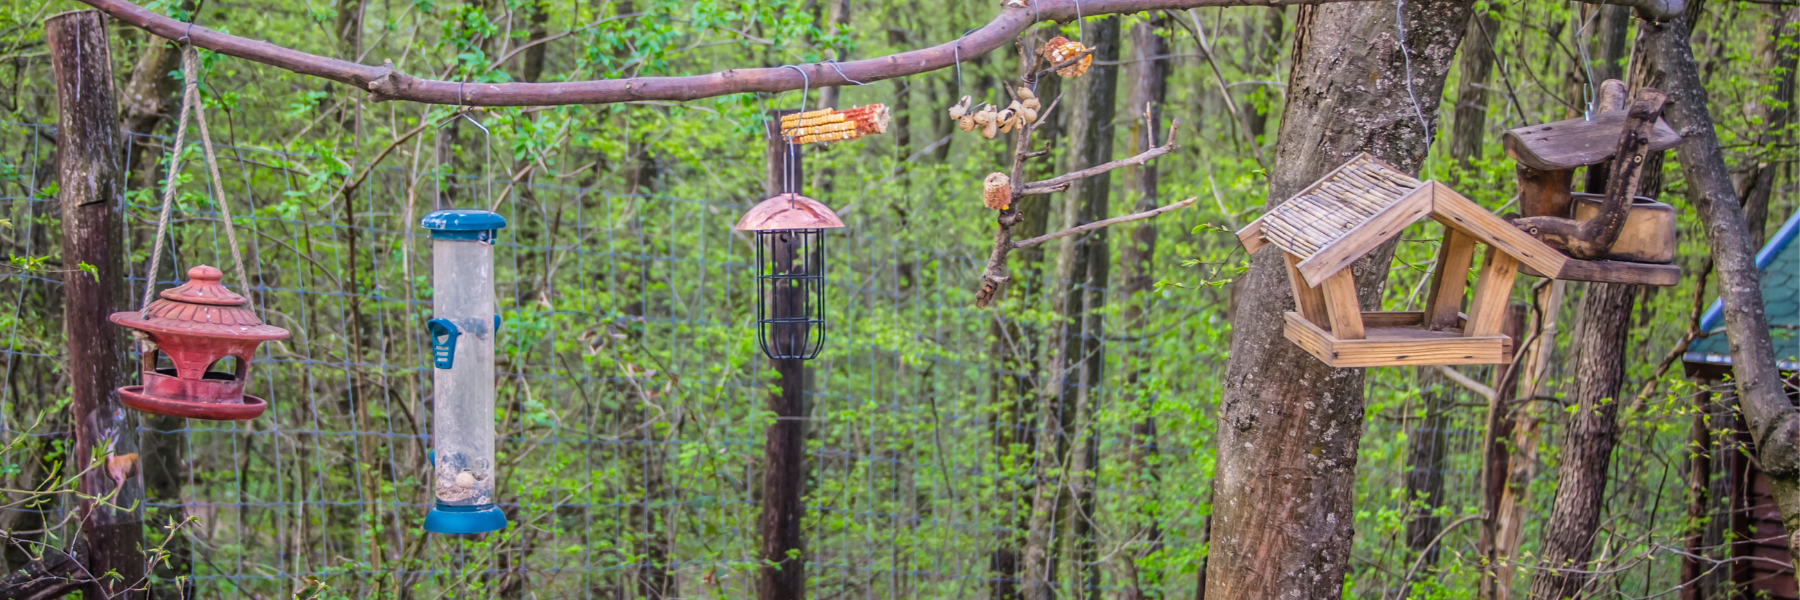 How to Choose the Right Bird Feeder For Your Backyard